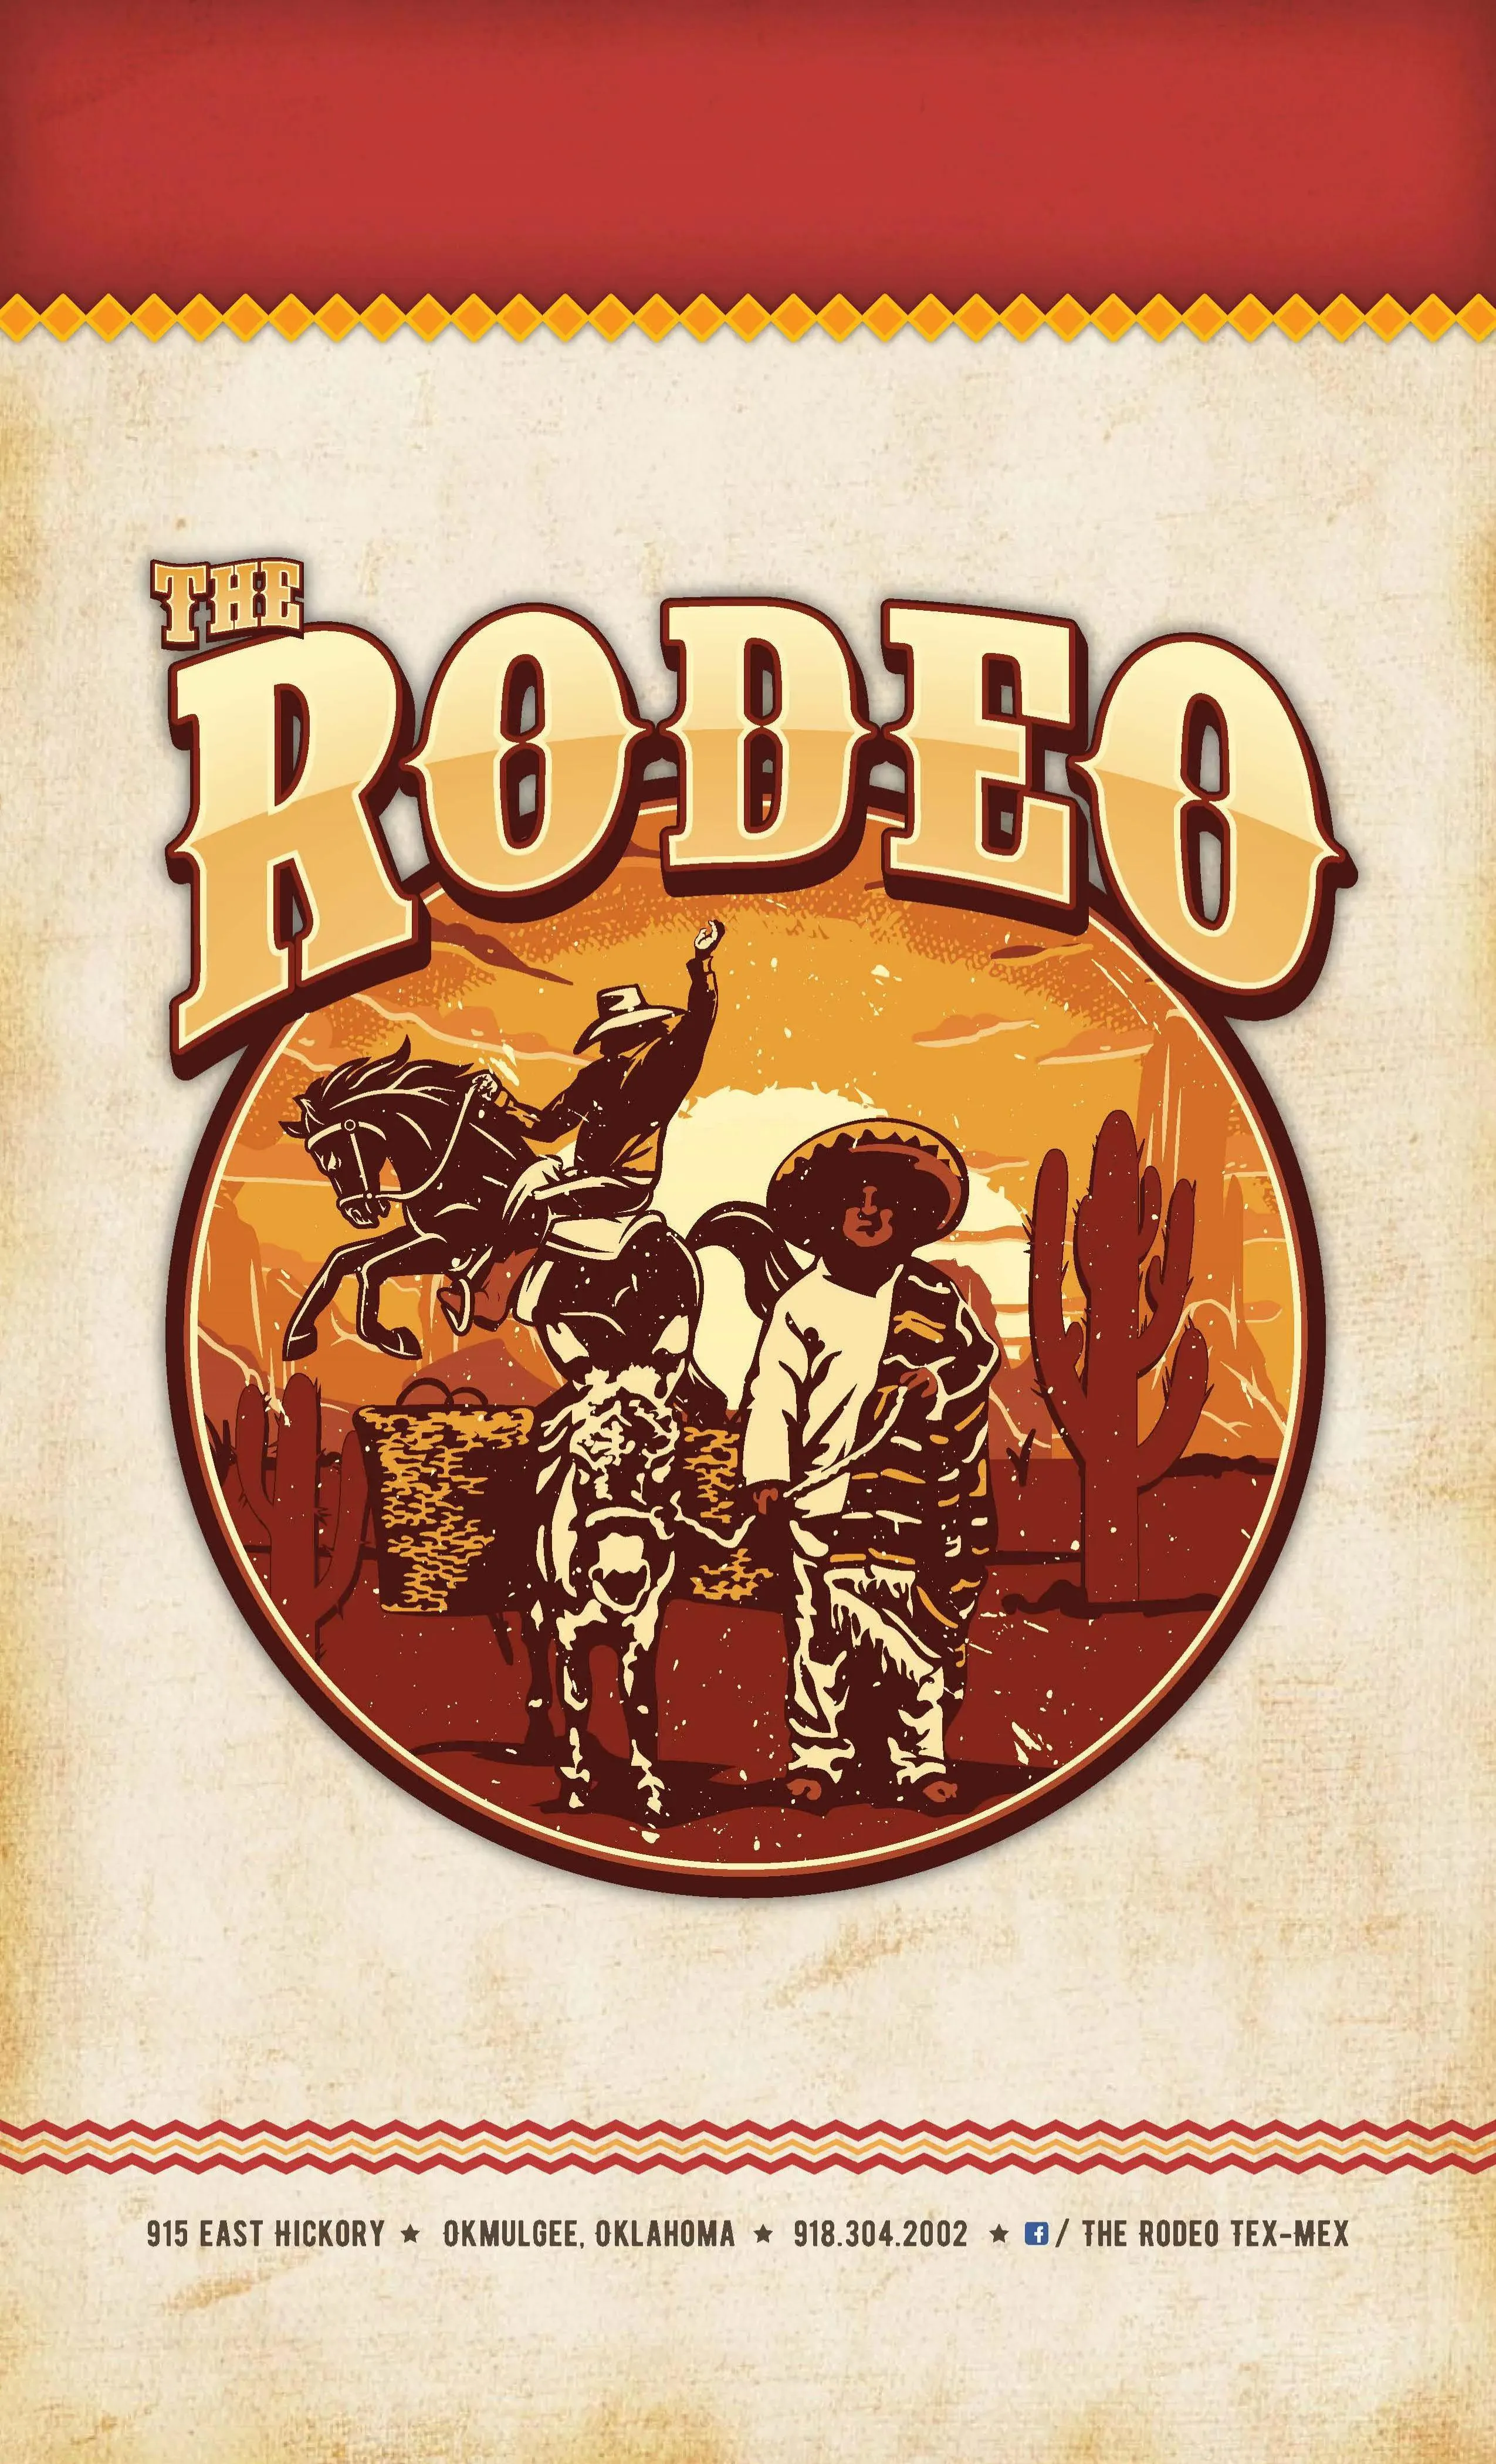 The Rodeo in Okmulgee menu cover page.